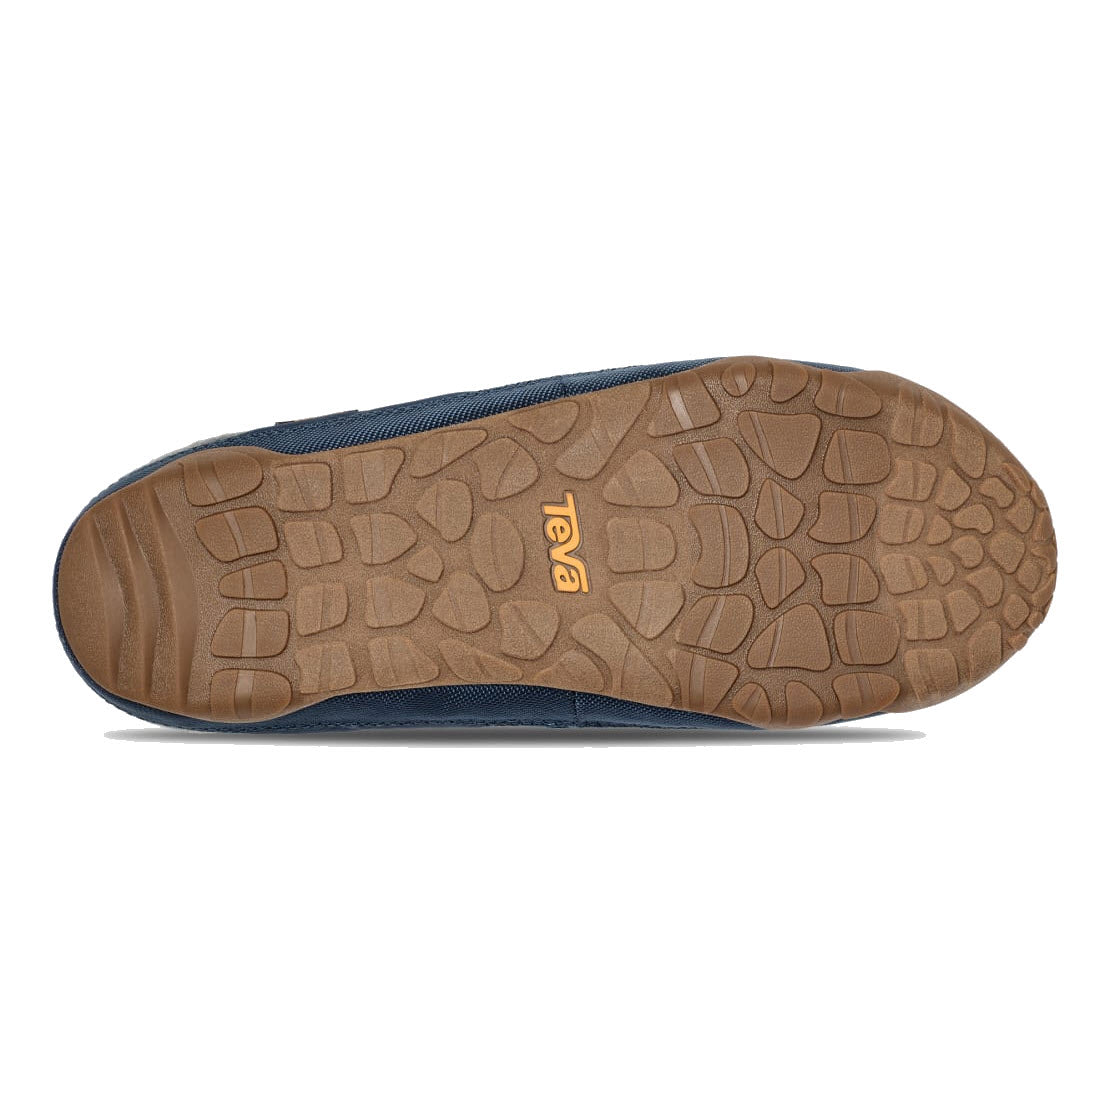 Bottom view of a TEVA REEMBER TERRAIN SLIP ON BLUE WING TEAL - MENS featuring a brown rubber sole with a pattern of hexagons and ridges; the brand Teva is embossed in yellow.